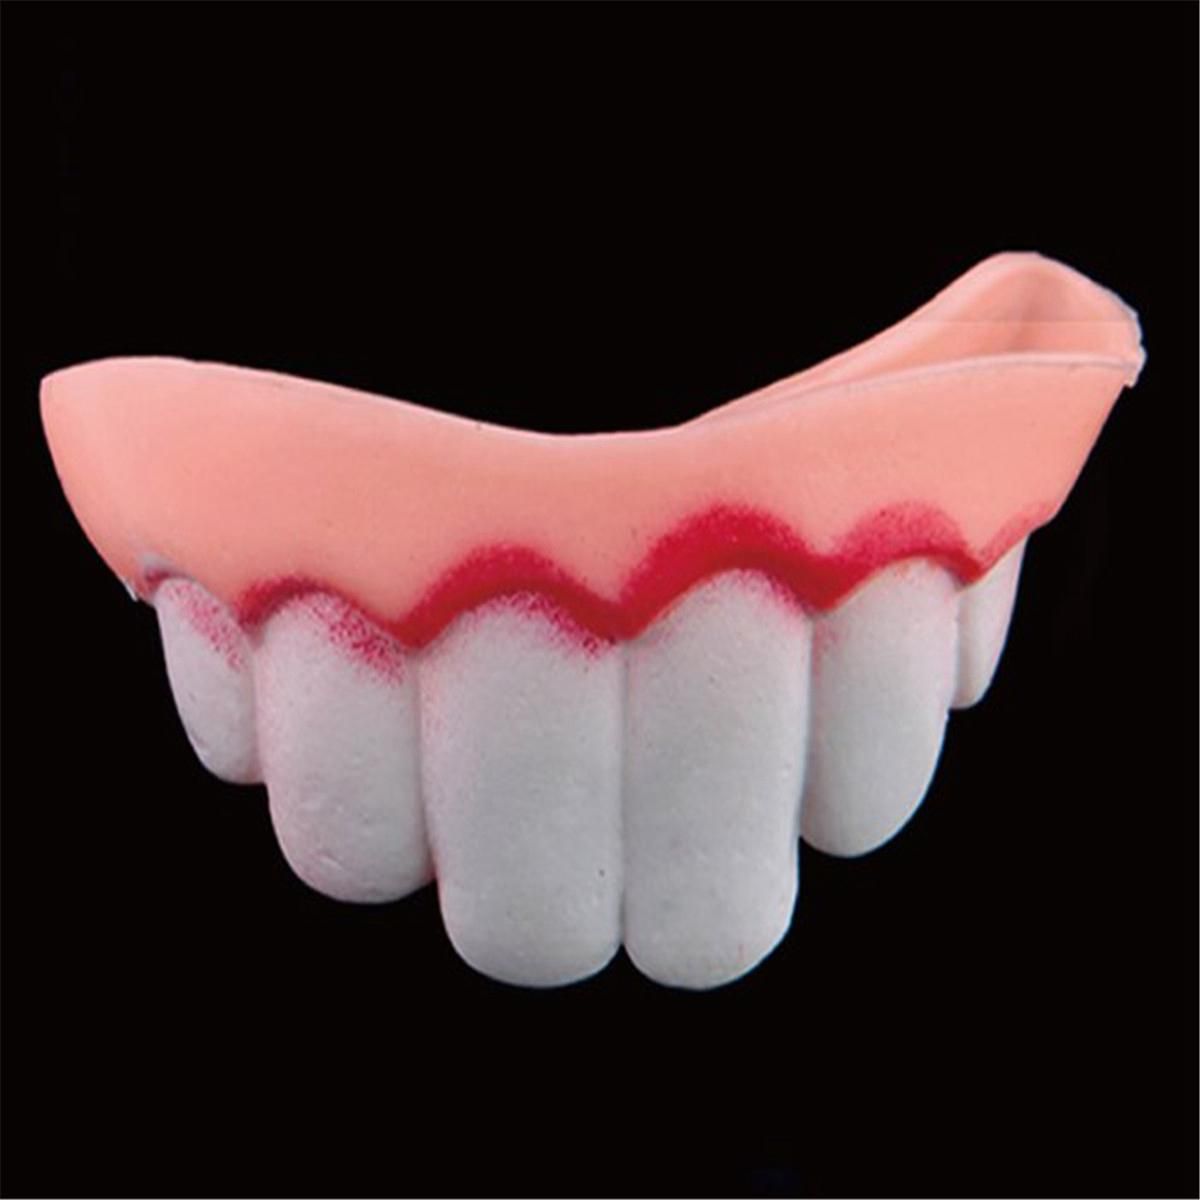 Halloween Funny Fake False Teeth Dentures Makeup Costume Masquerade Dress  Party - Buy Halloween Funny Fake False Teeth Dentures Makeup Costume  Masquerade Dress Party Online at Low Price - Snapdeal